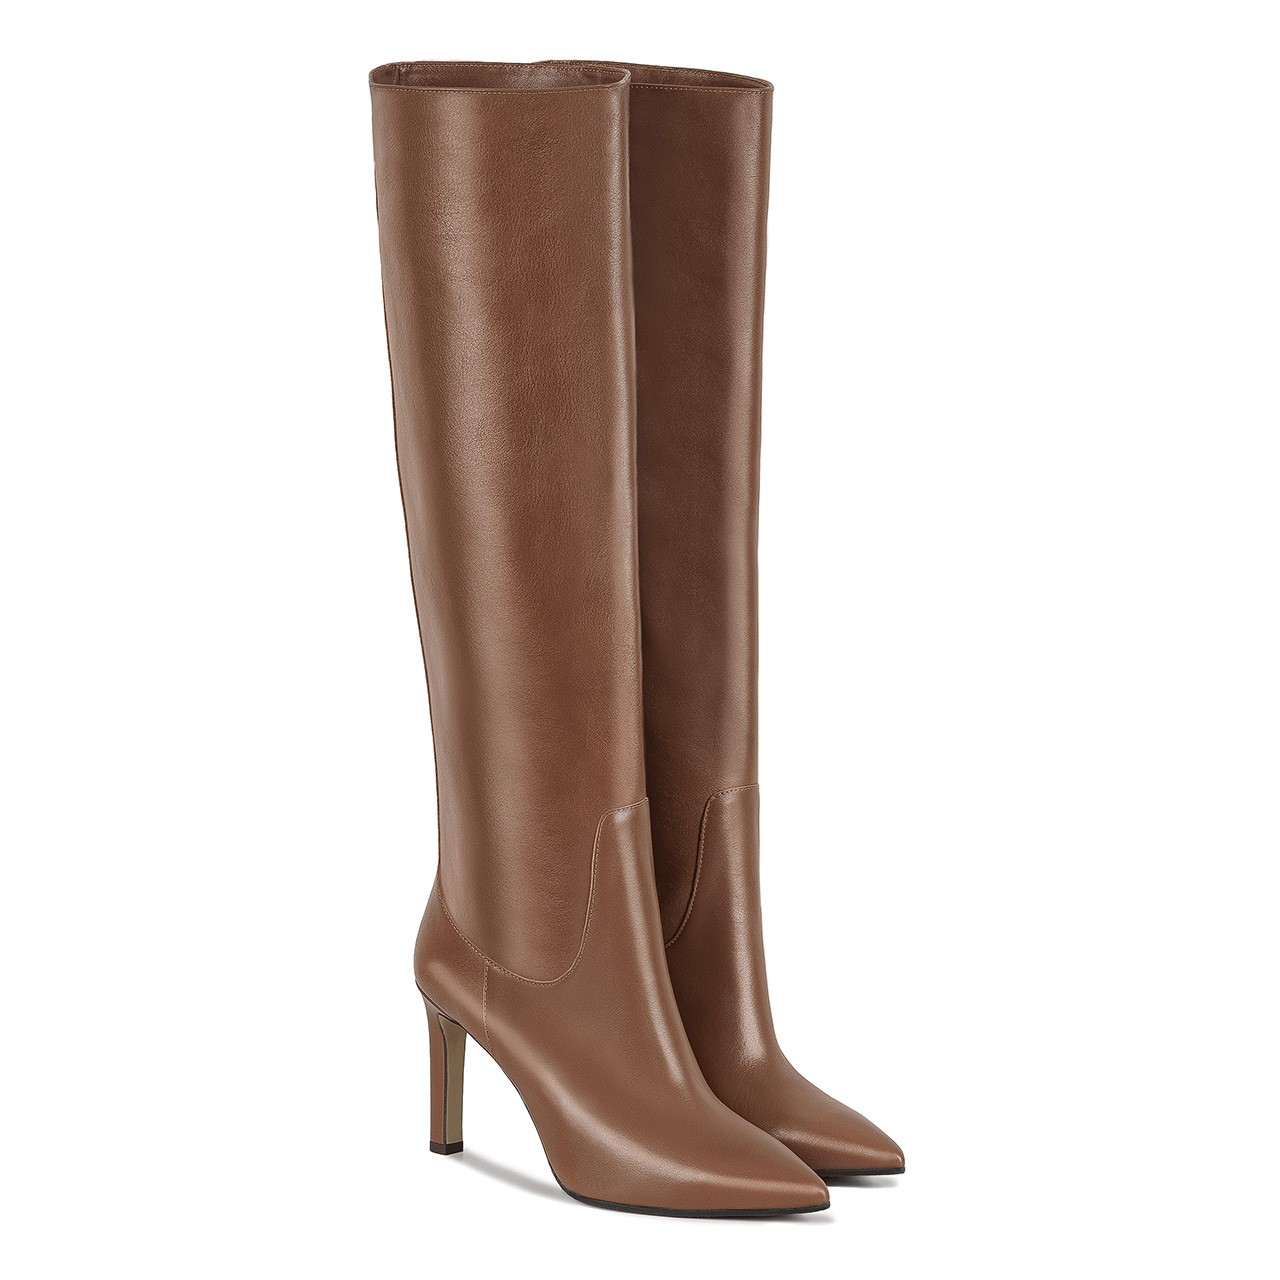 High-heeled light brown boots, fashioned from genuine grain leather, stand 9 cm tall